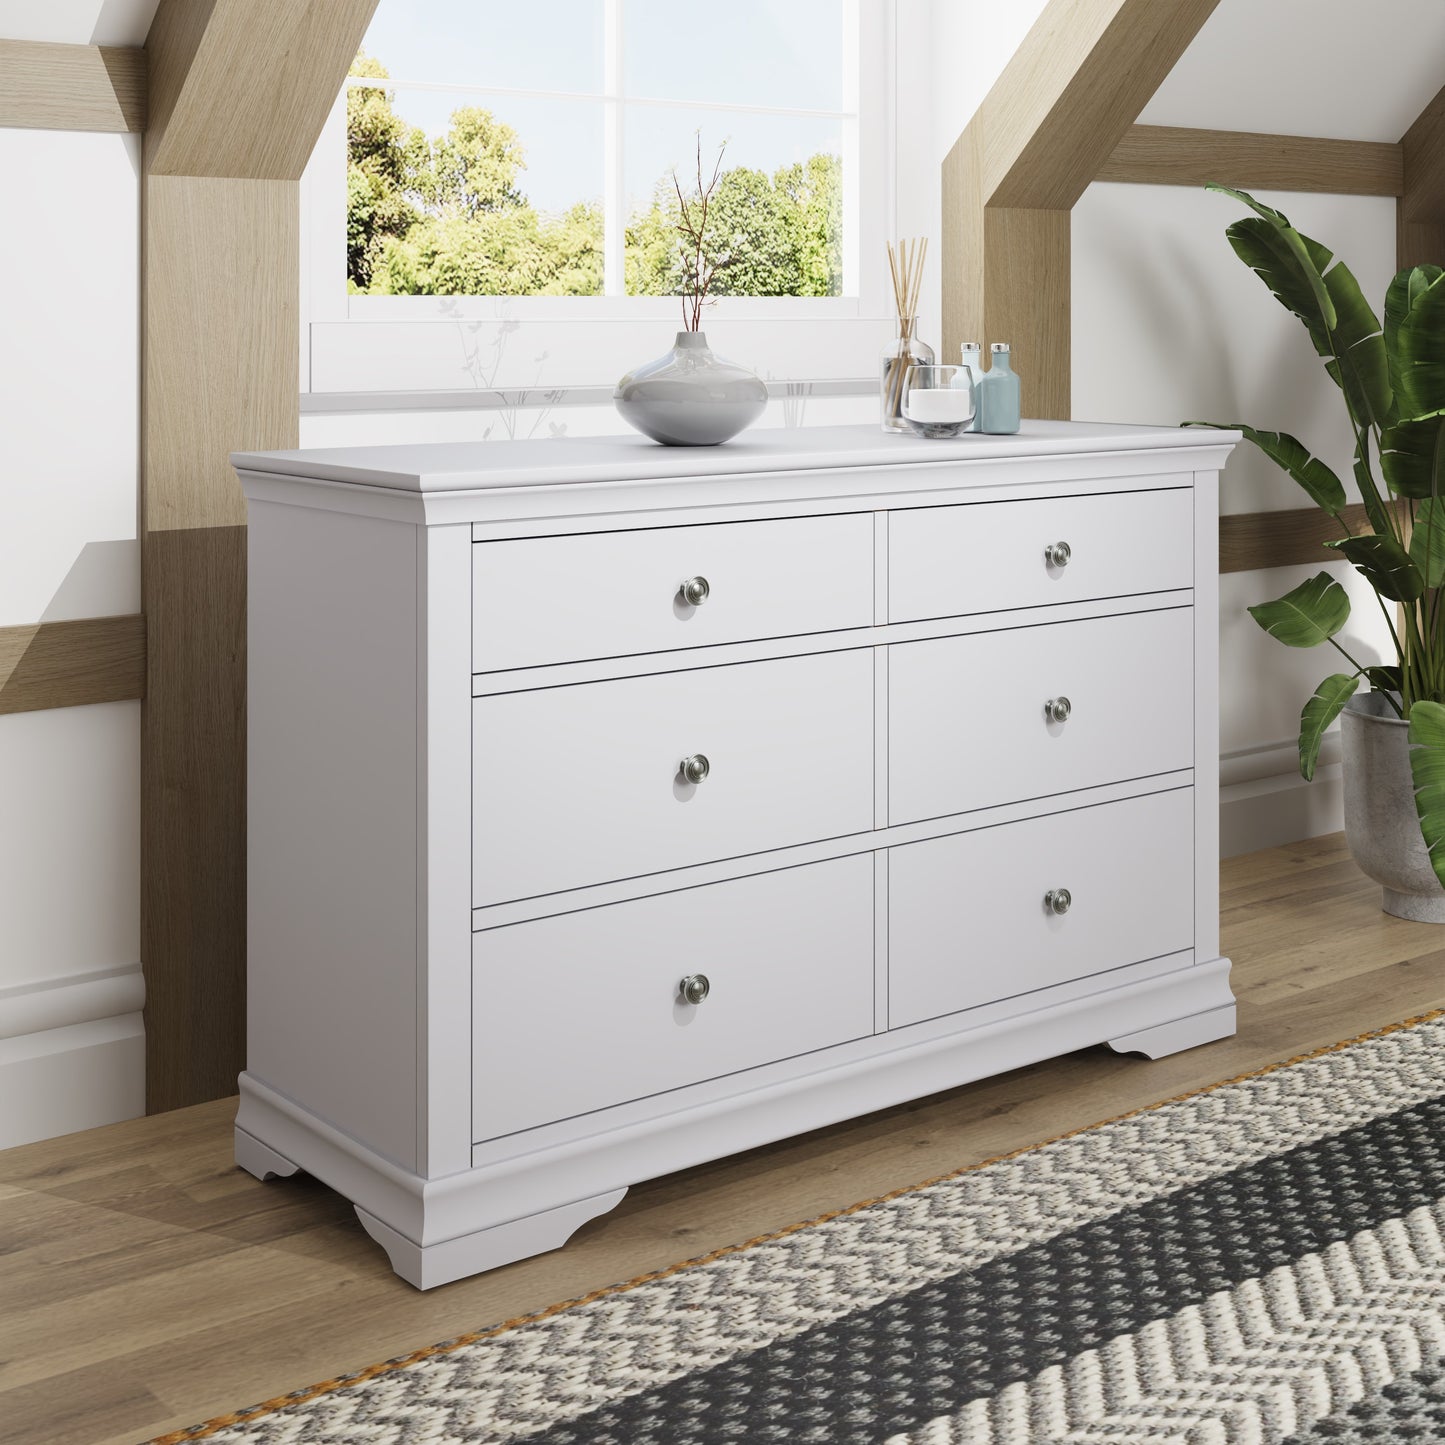 SW Bedroom - Grey 6 Drawer Chest